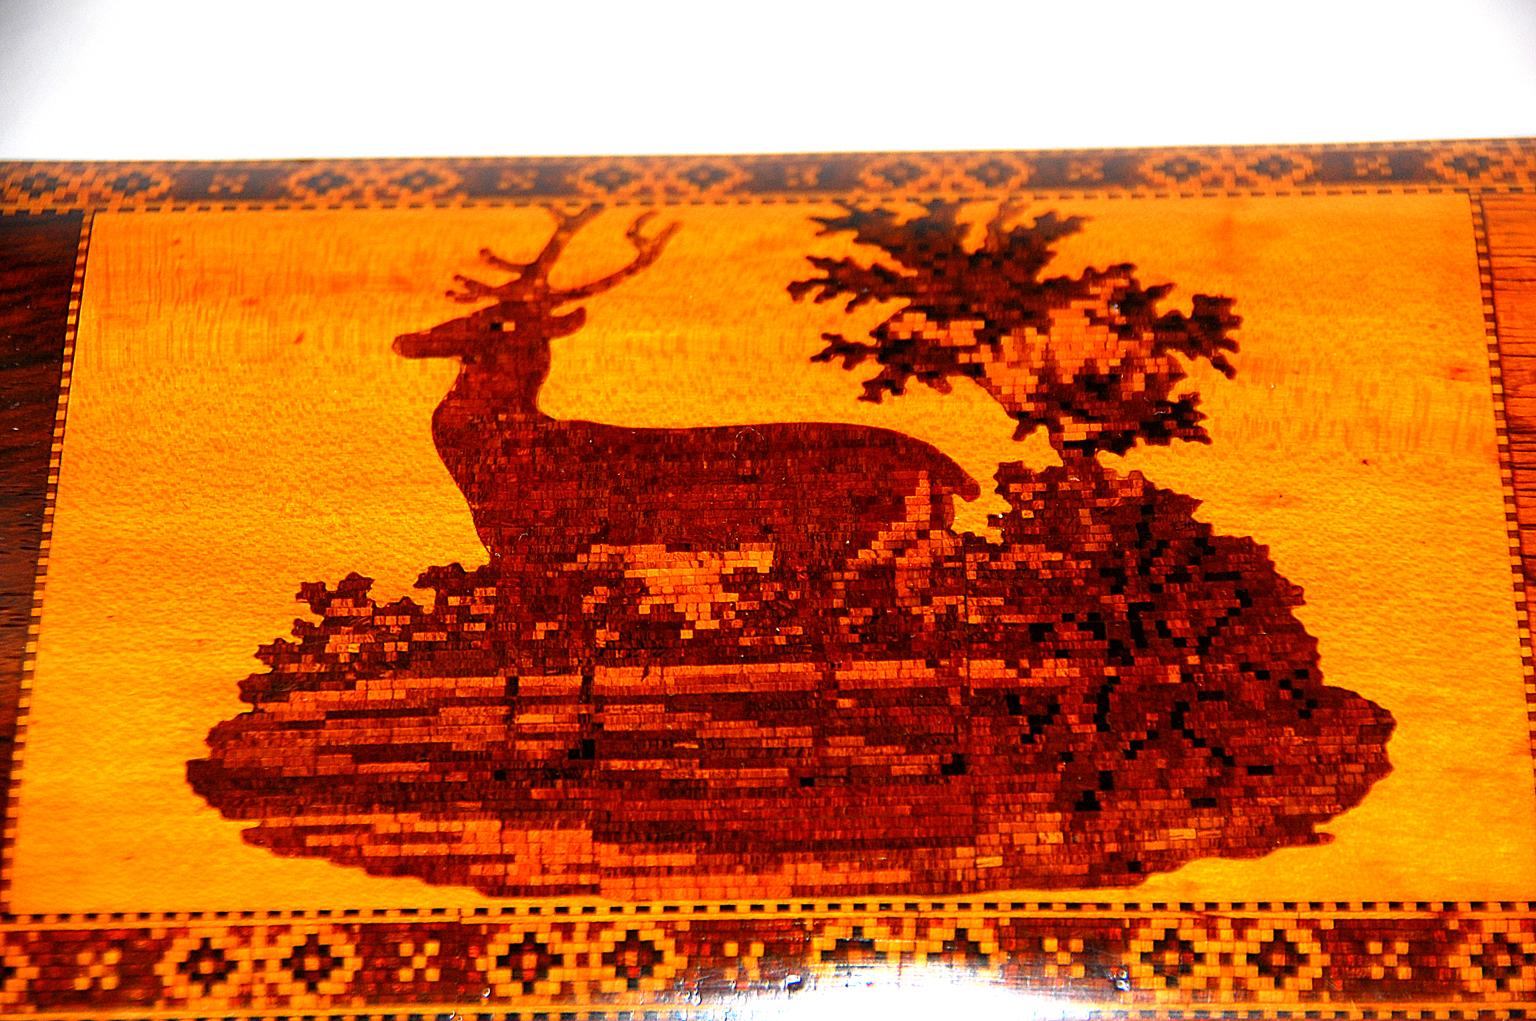 English mid 19th century rosewood tunbridge inlaid teacaddy with deer and fawn motif to the top. This micro tunbridge inlaid box is in superb condition, it's subtlety waisted shape and multiple borders set off the central boxwood cartouche of the